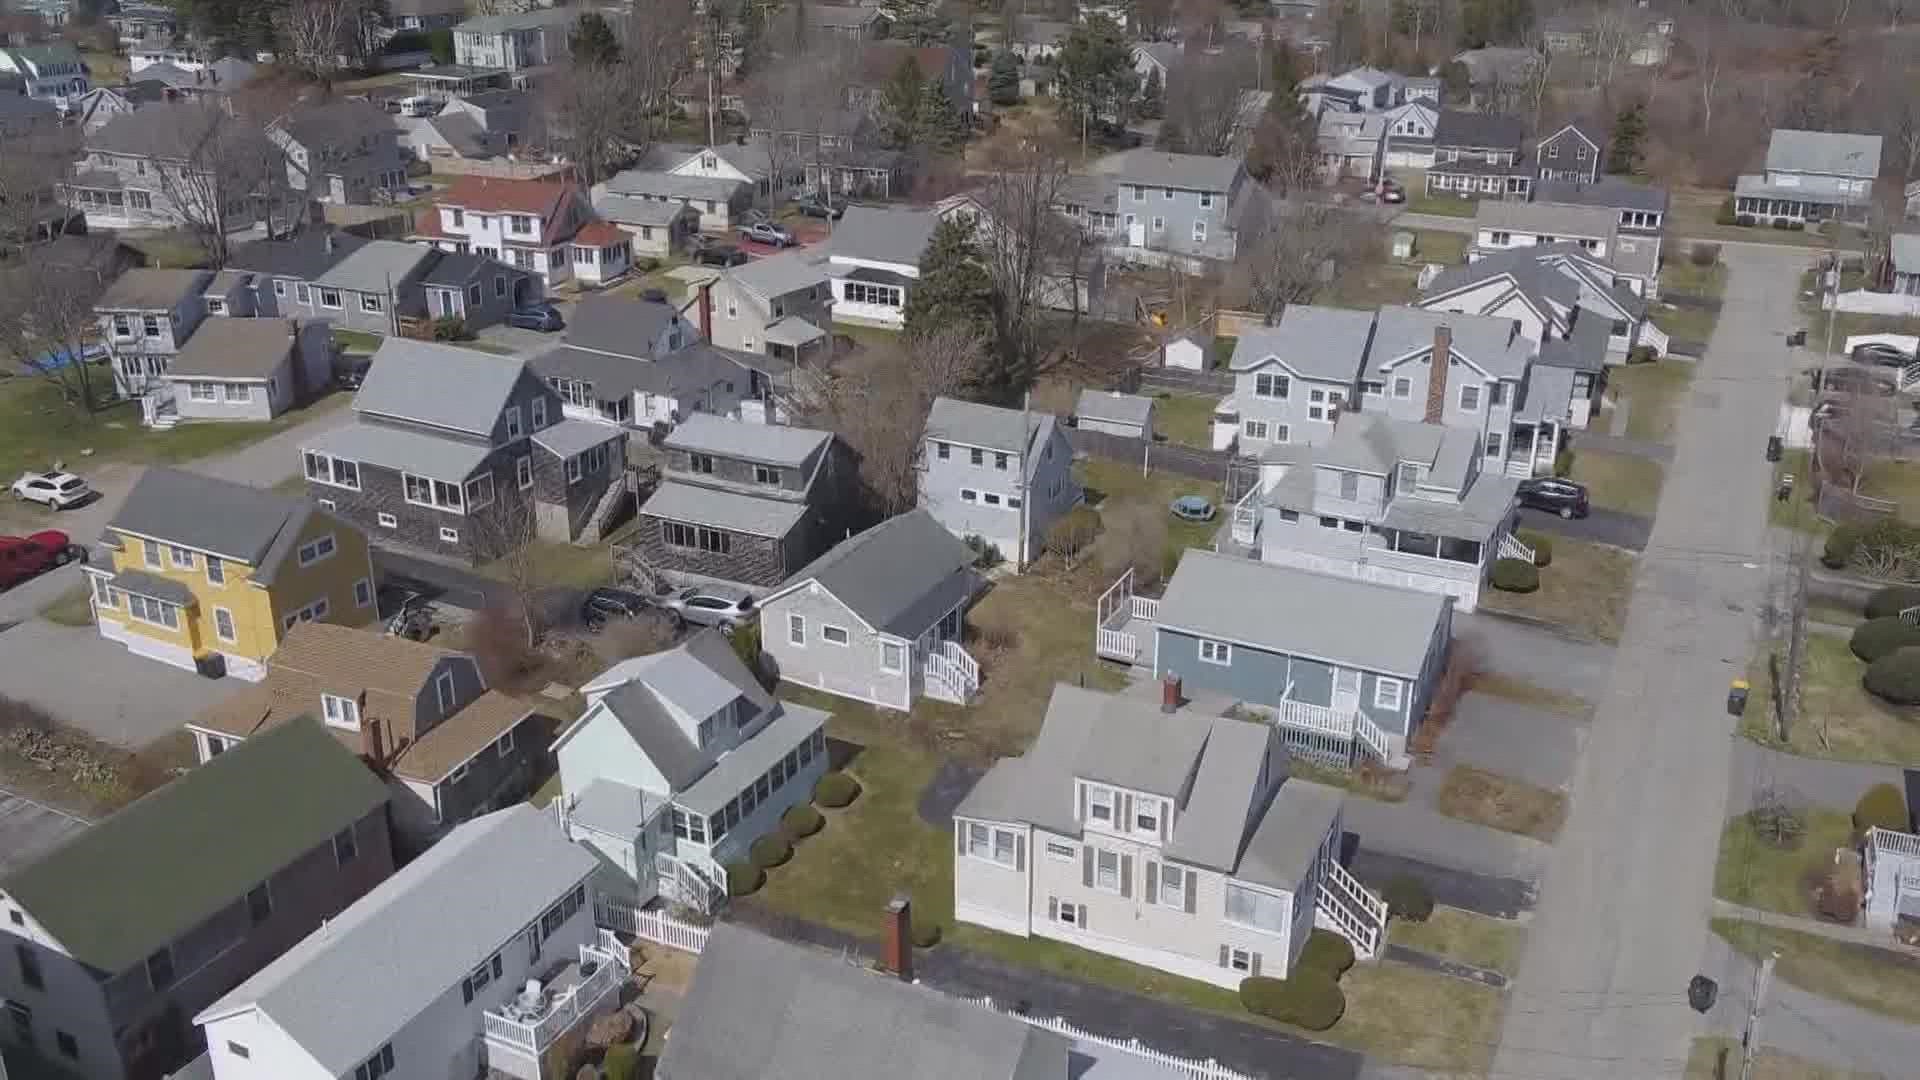 In 2021, 42 Mainers lost nearly half a million dollars through real estate and rental scams.